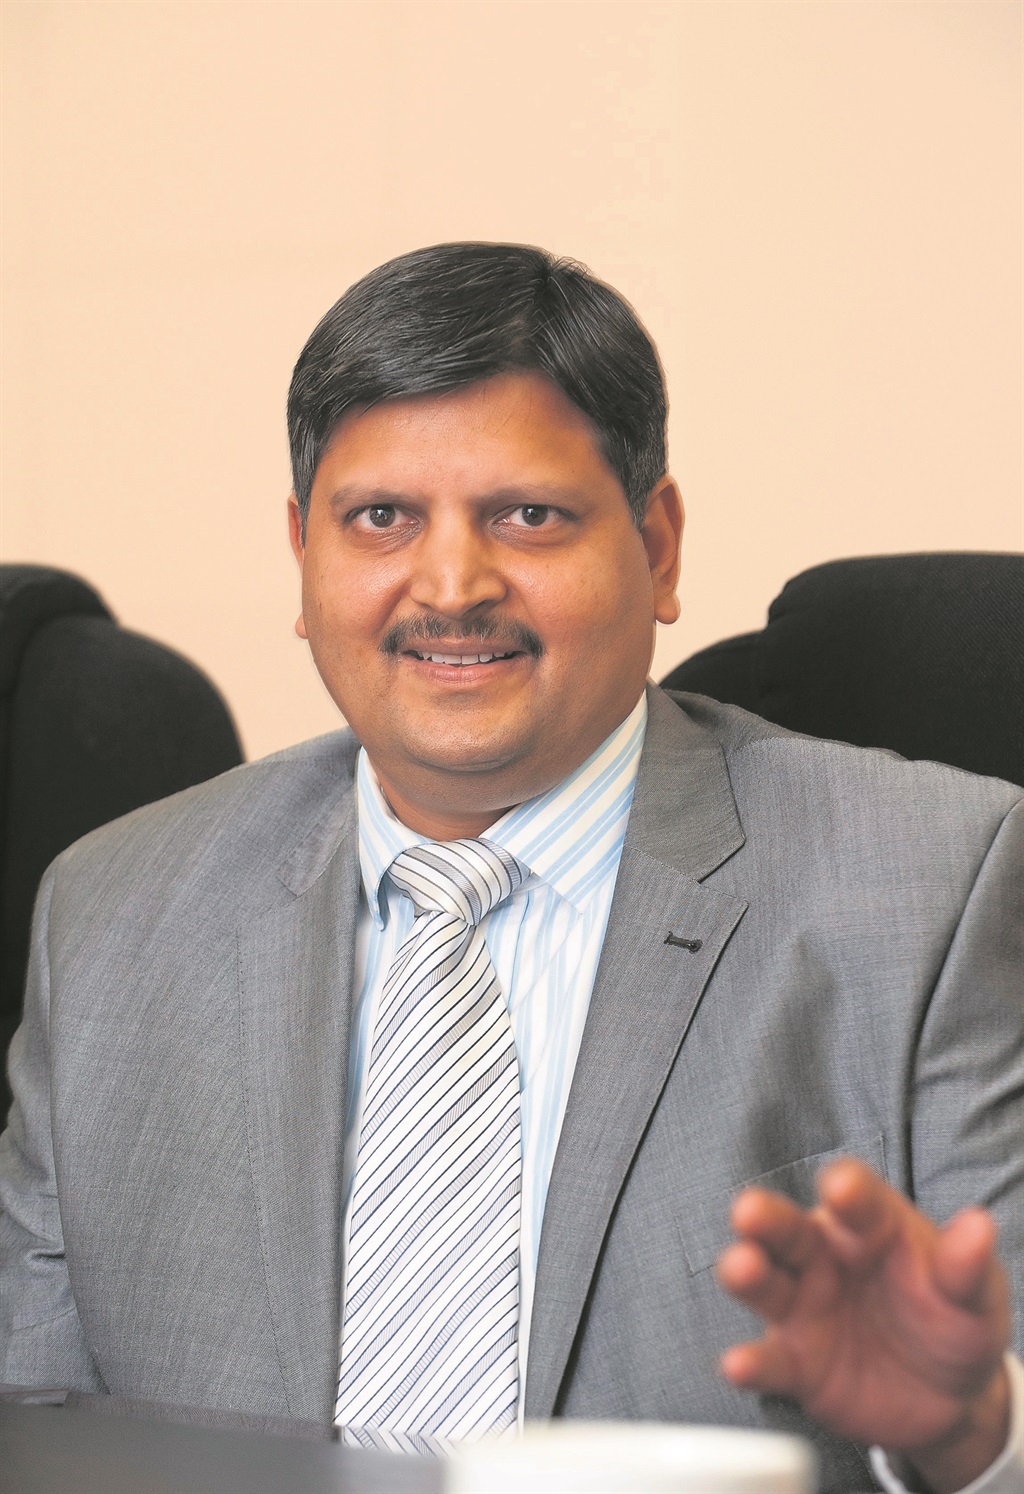 ndian businessman, Atul Gupta at a one on one interview with Business Day in Johannesburg, South Africa on 2 March 2011 regarding his professional relationships. (Photo by Gallo Images/Business Day/Martin Rhodes)